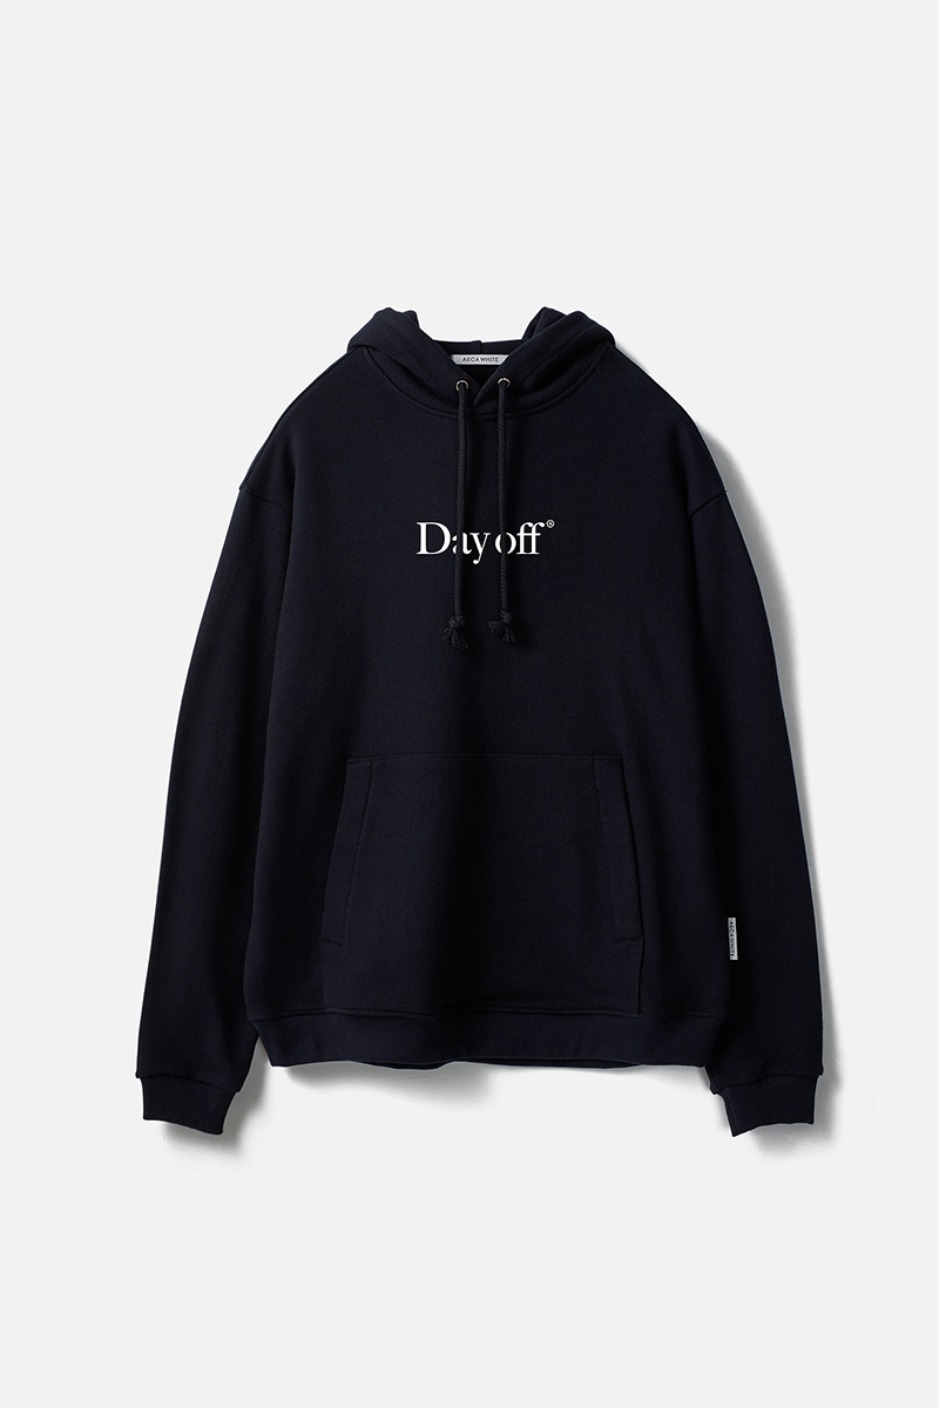 DAY OFF PULLOVER HOODIE-NAVY